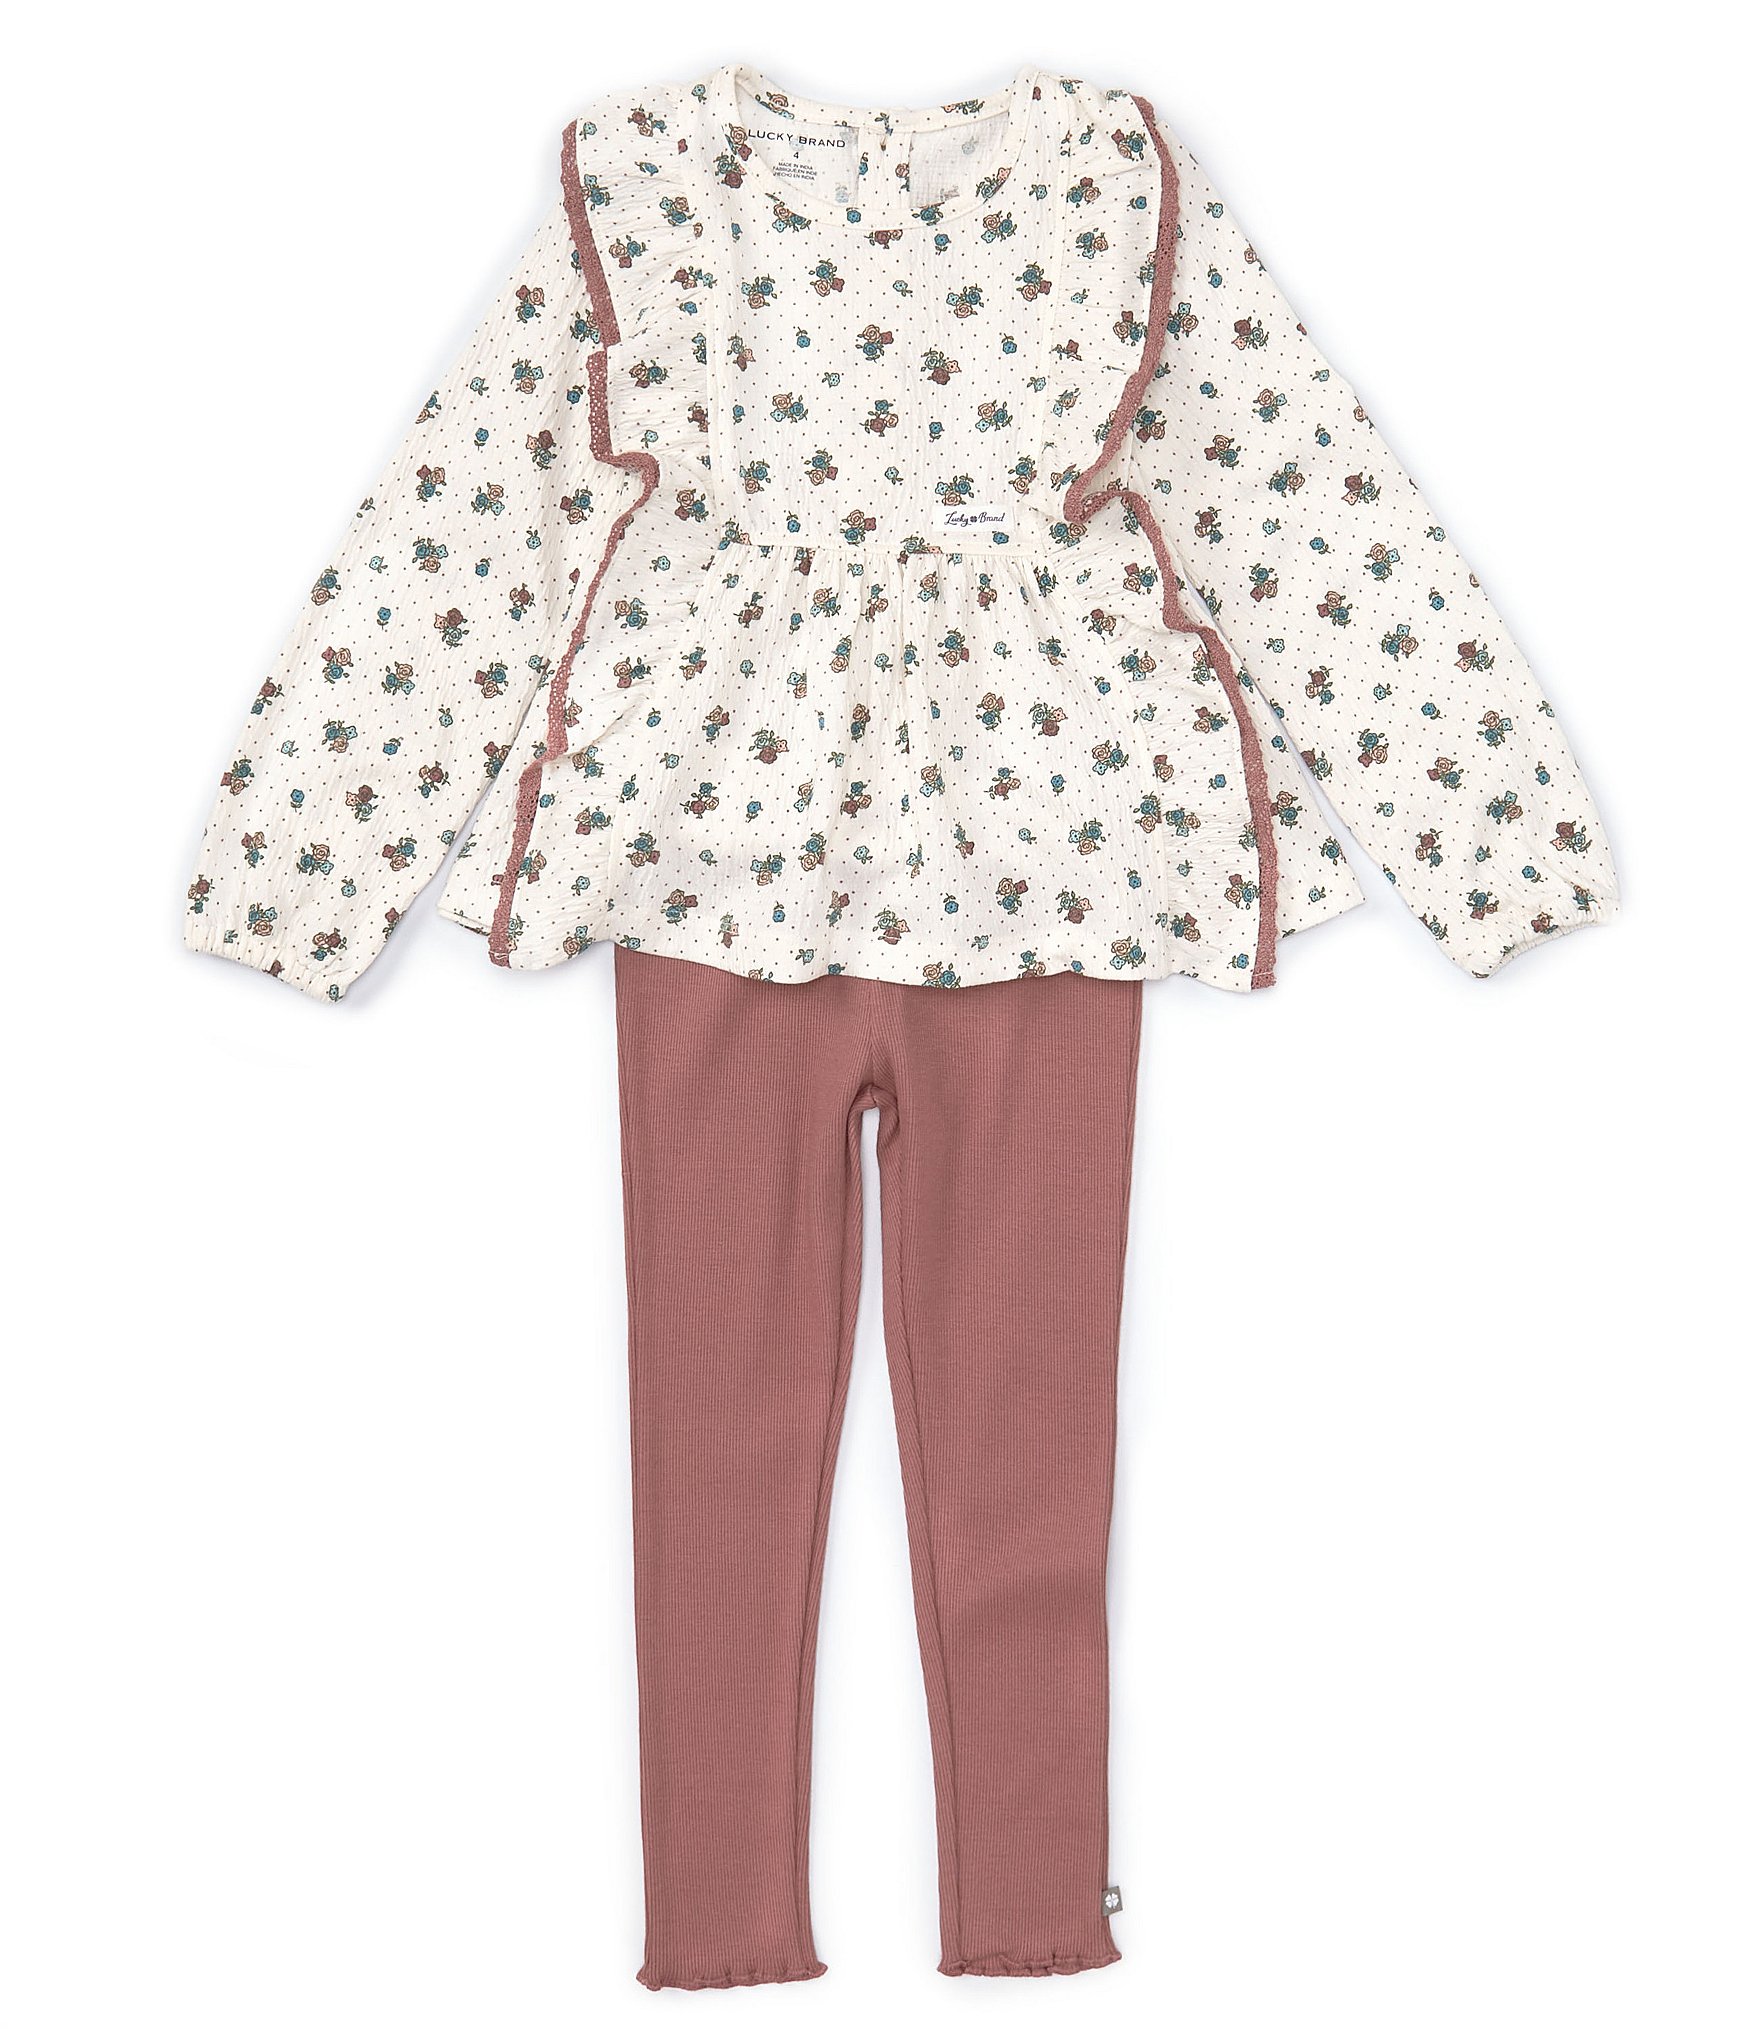 https://dimg.dillards.com/is/image/DillardsZoom/zoom/lucky-brand-little-girls-2t-6x-long-sleeve-printed-crinkle-jersey-tunic-top--solid-knit-leggings-set/00000000_zi_a56e3f78-f84e-48e8-b1a6-ecfd6f0dd6dd.jpg